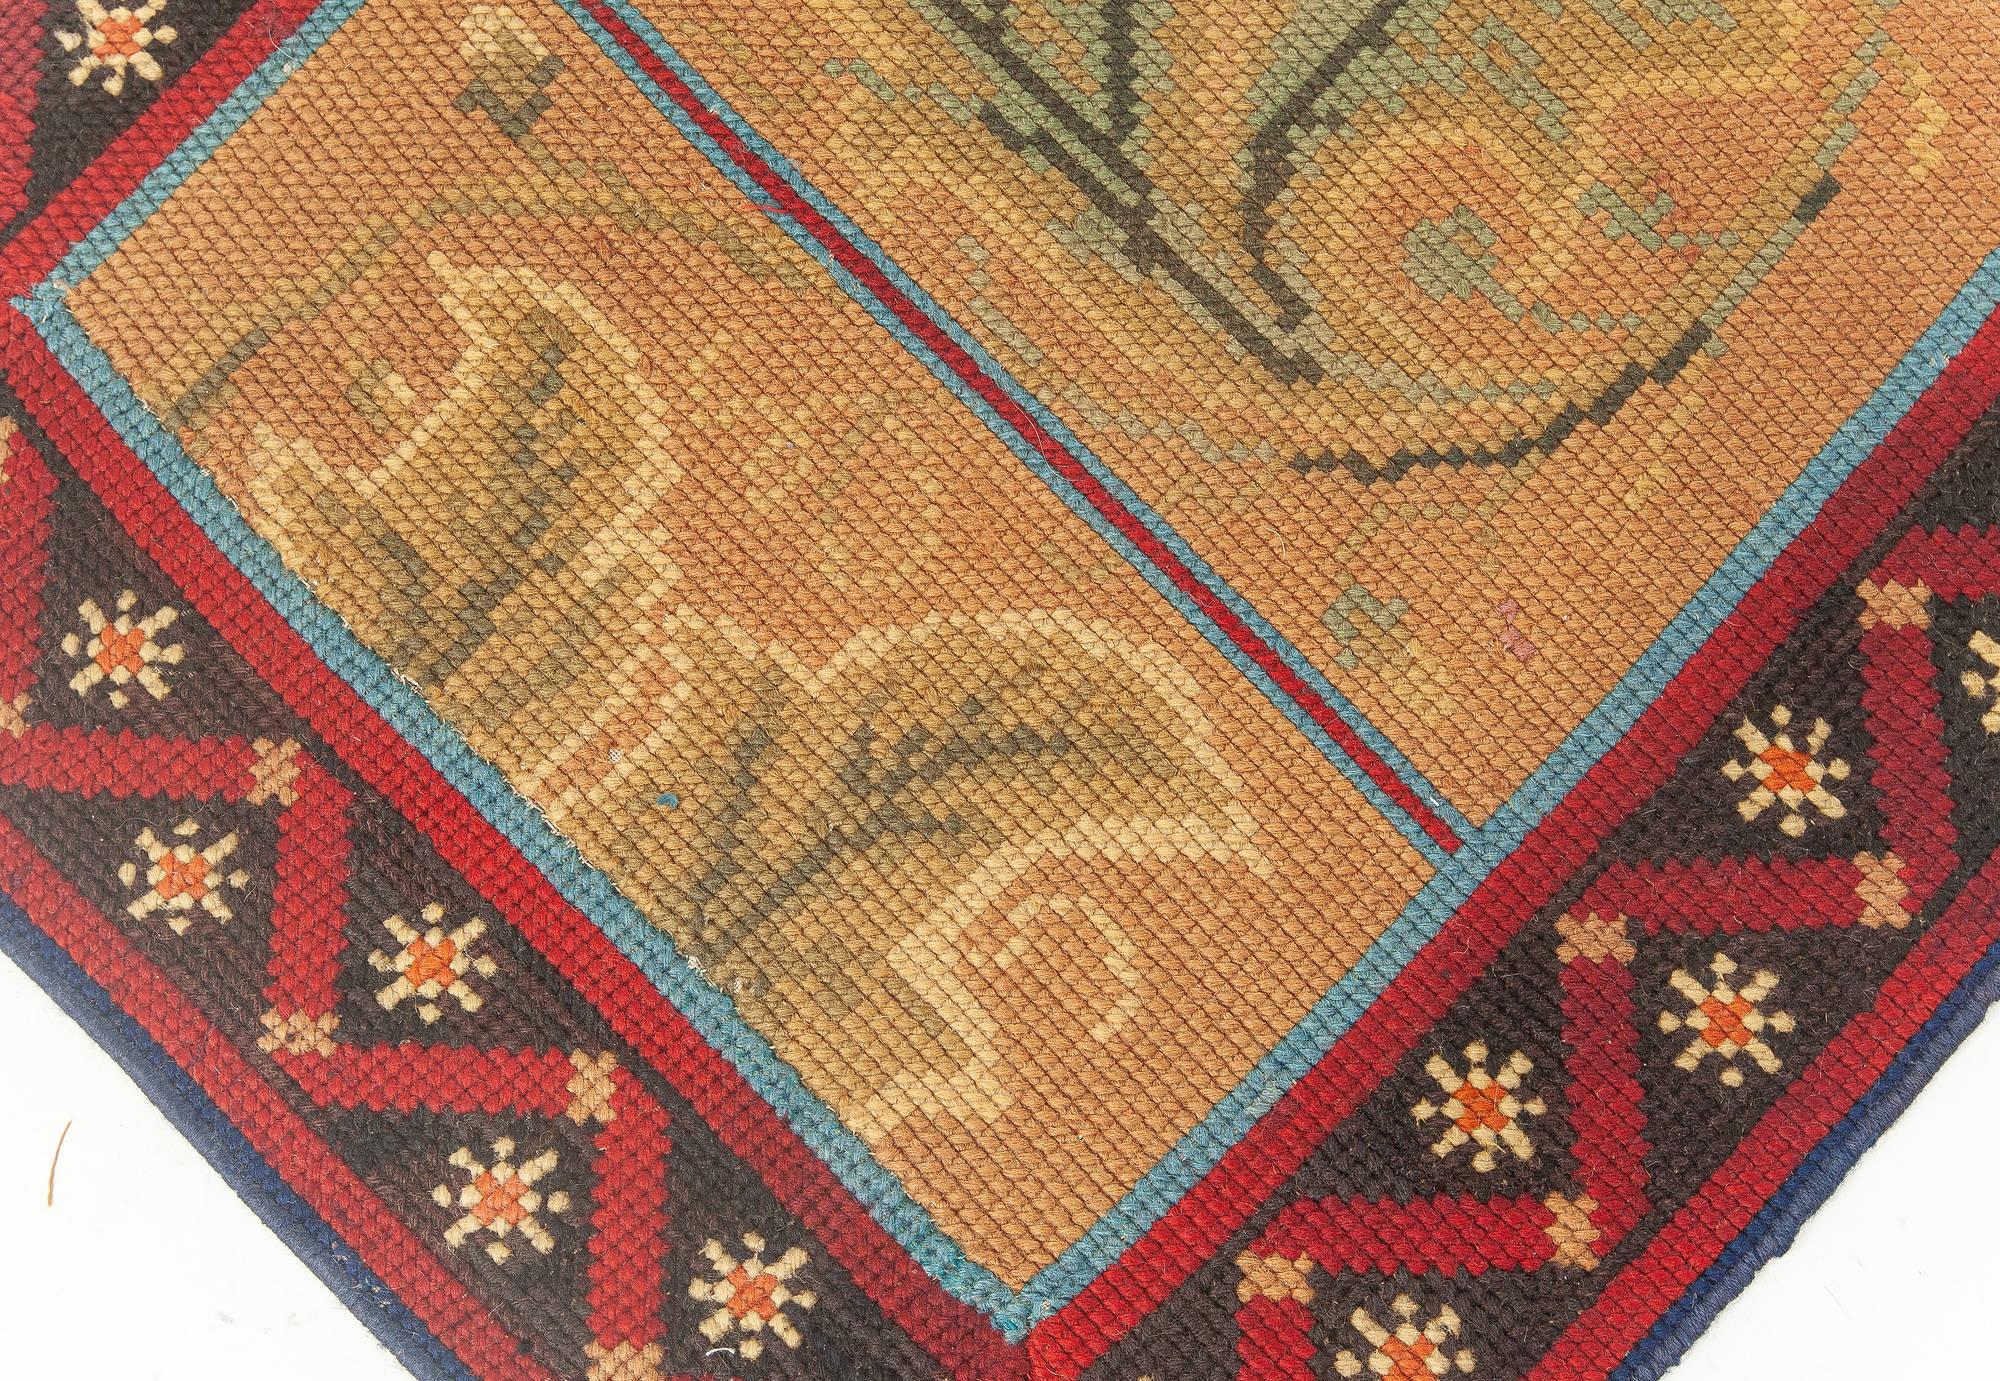 Antique needle point runner
Size: 2'6